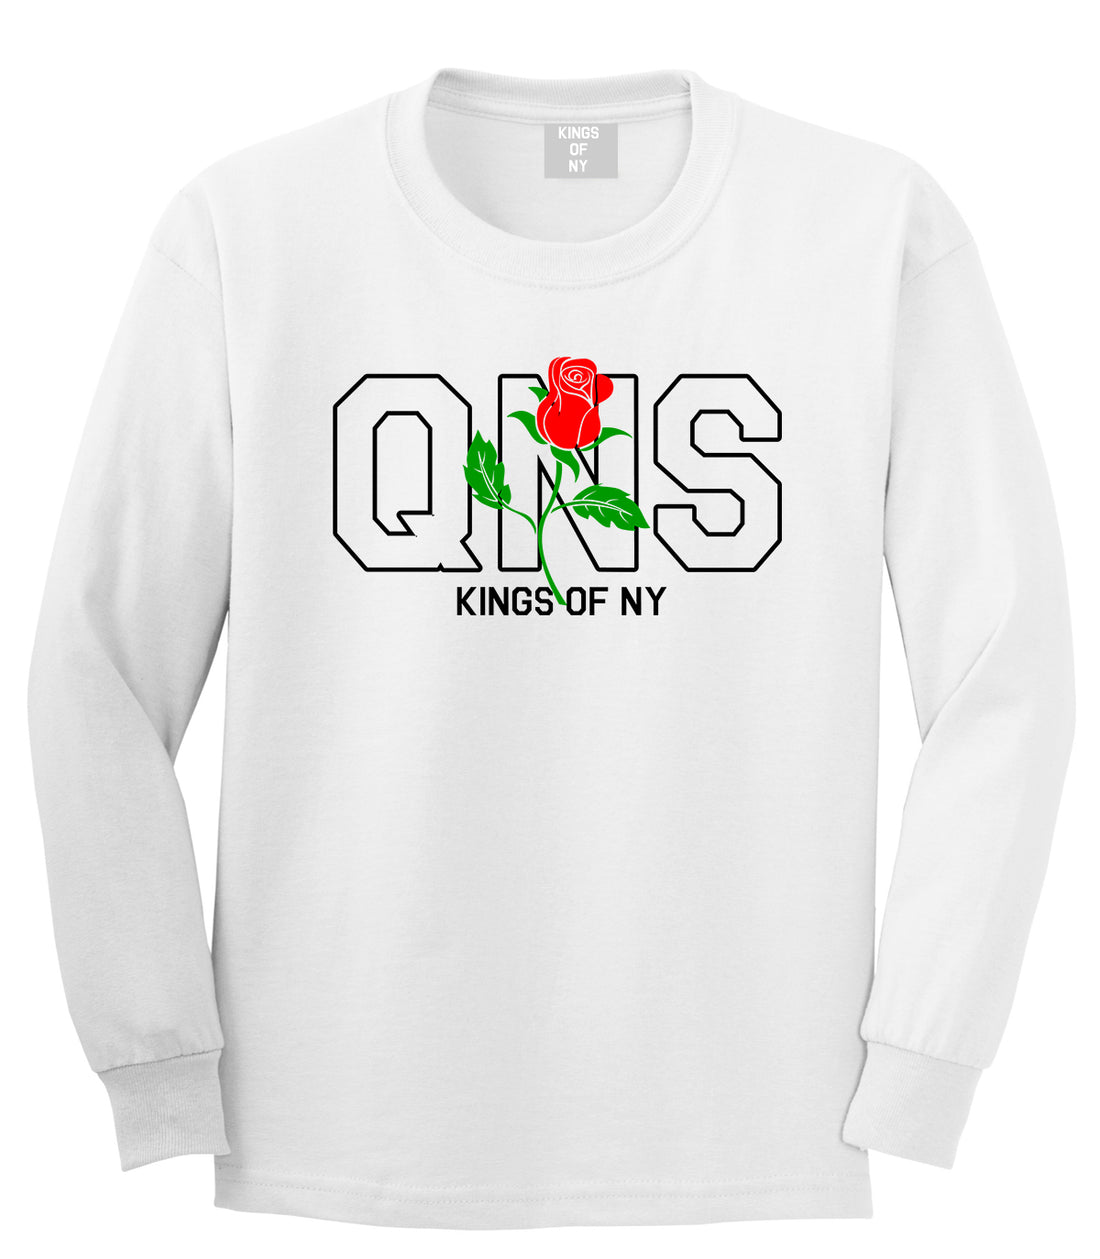 Rose QNS Queens Kings Of NY Mens Long Sleeve T-Shirt White